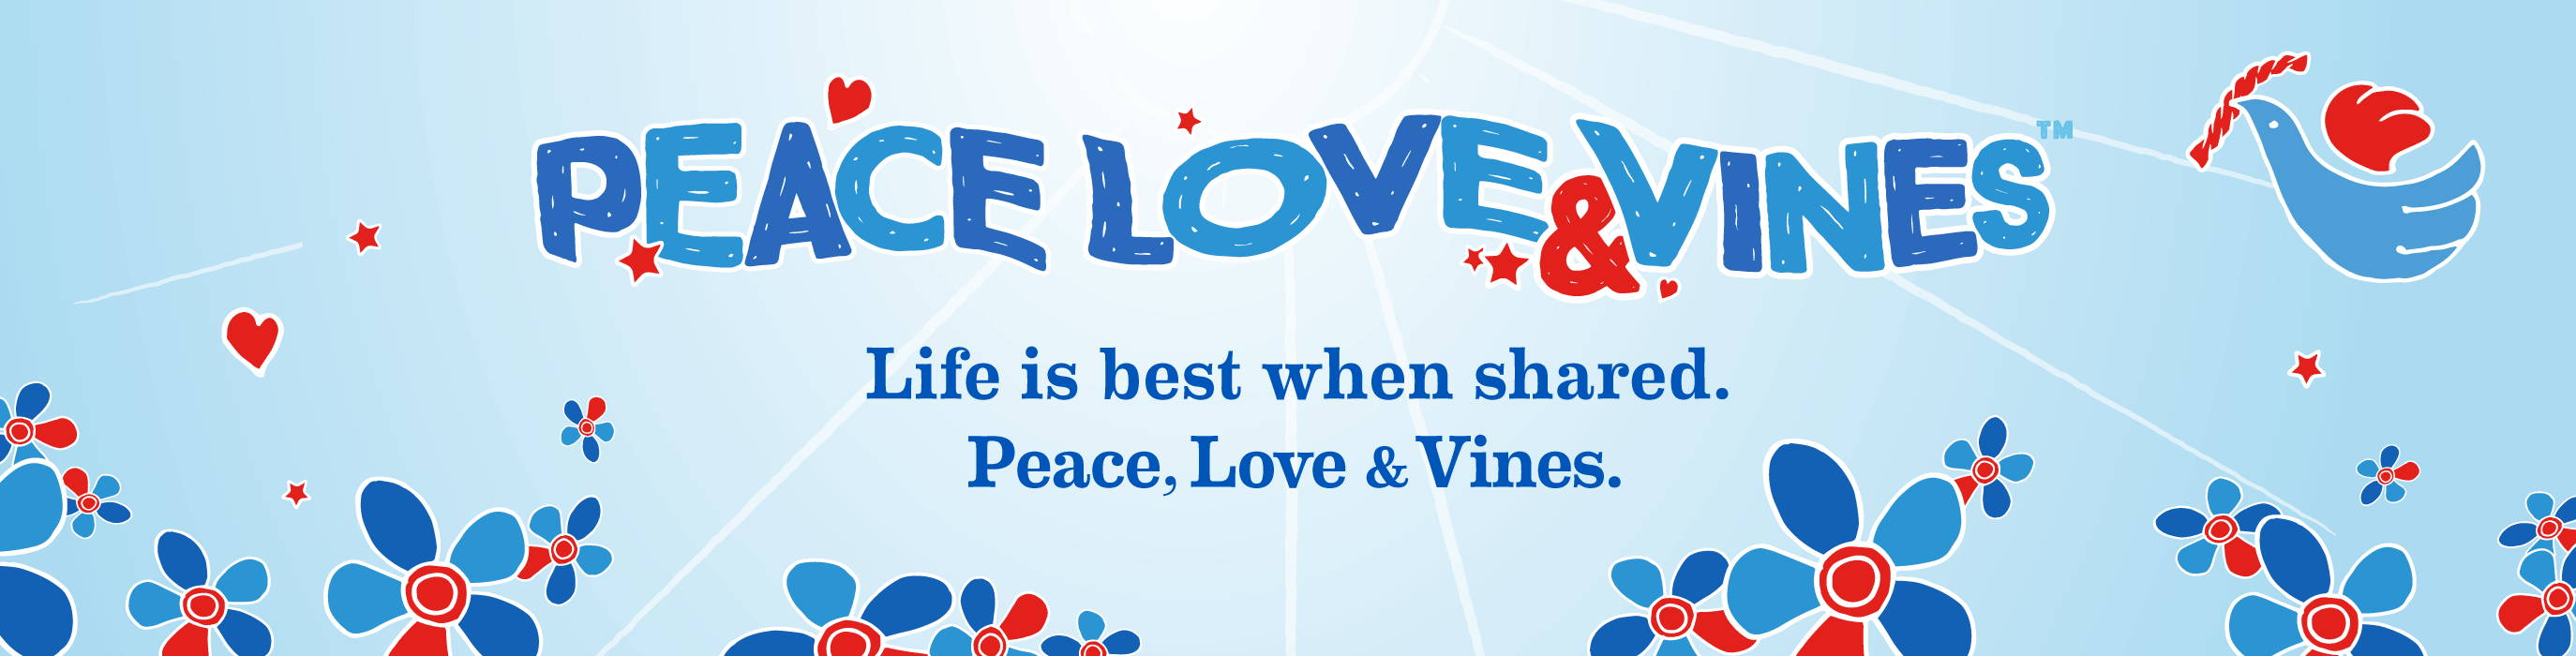 Peace, Love & Vines banner - Life is best when shared. Peace, Love & Vines.